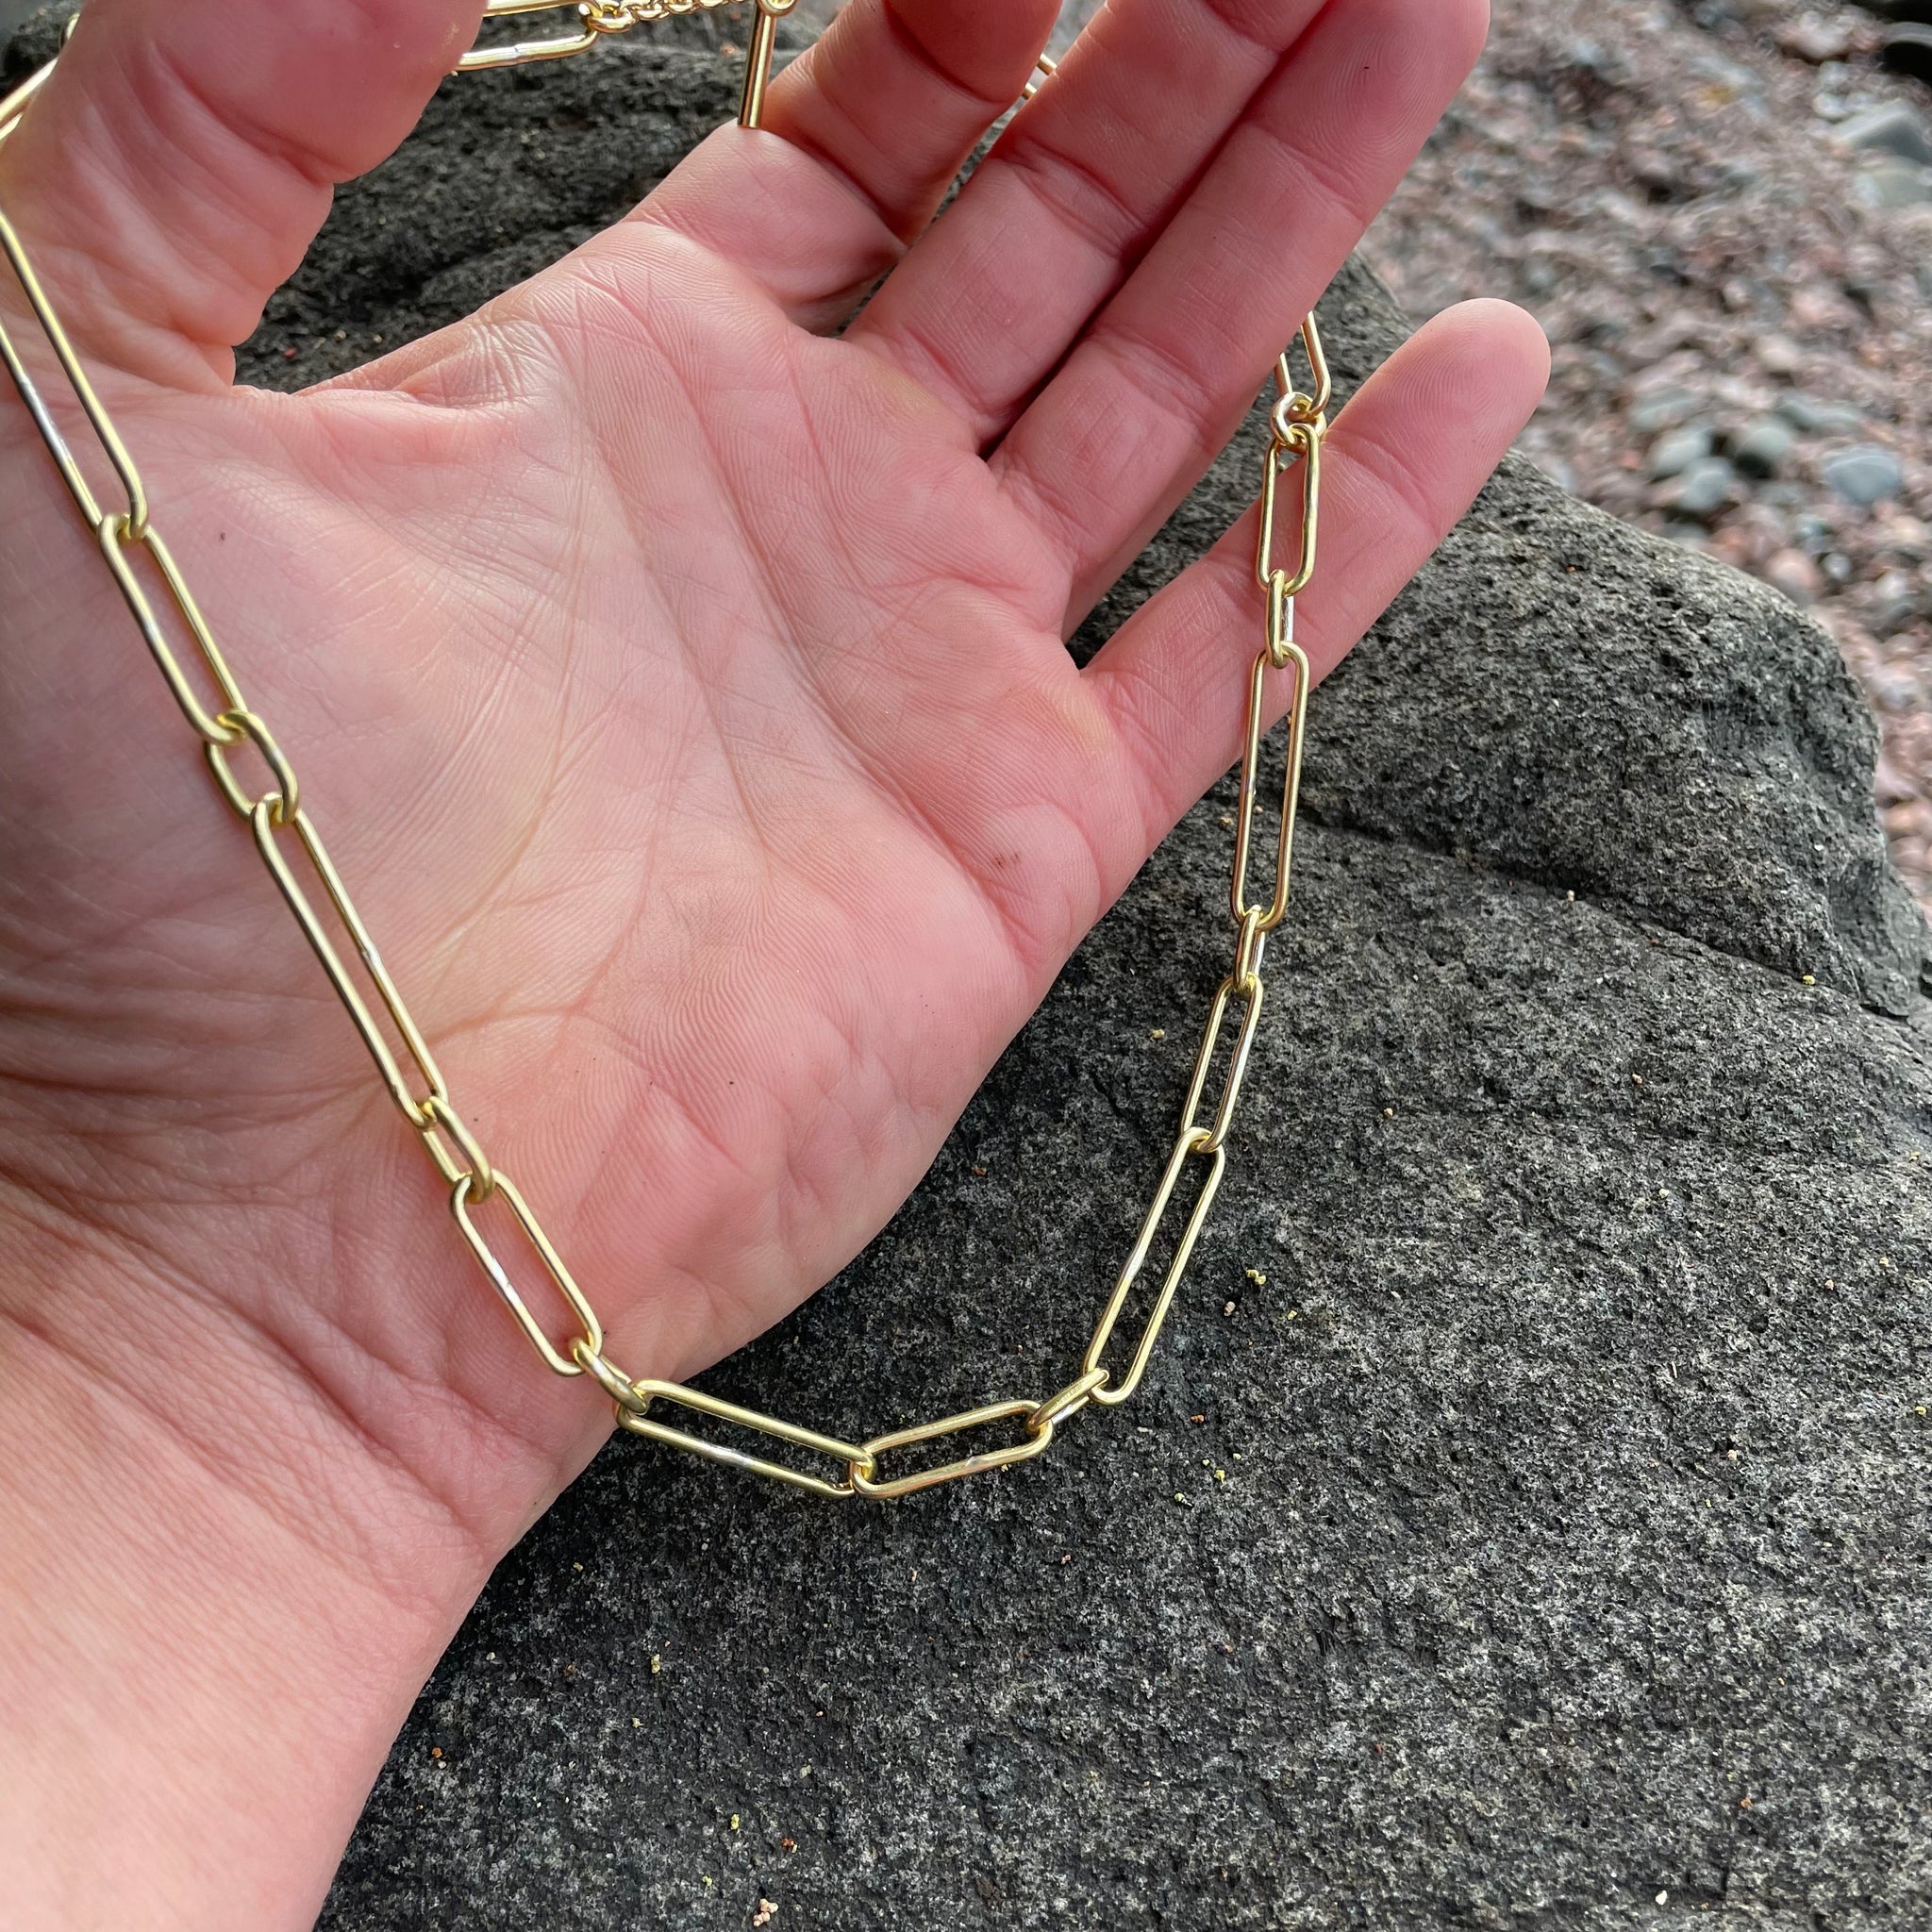 Loop Link Necklace in Brass by Mulxiply